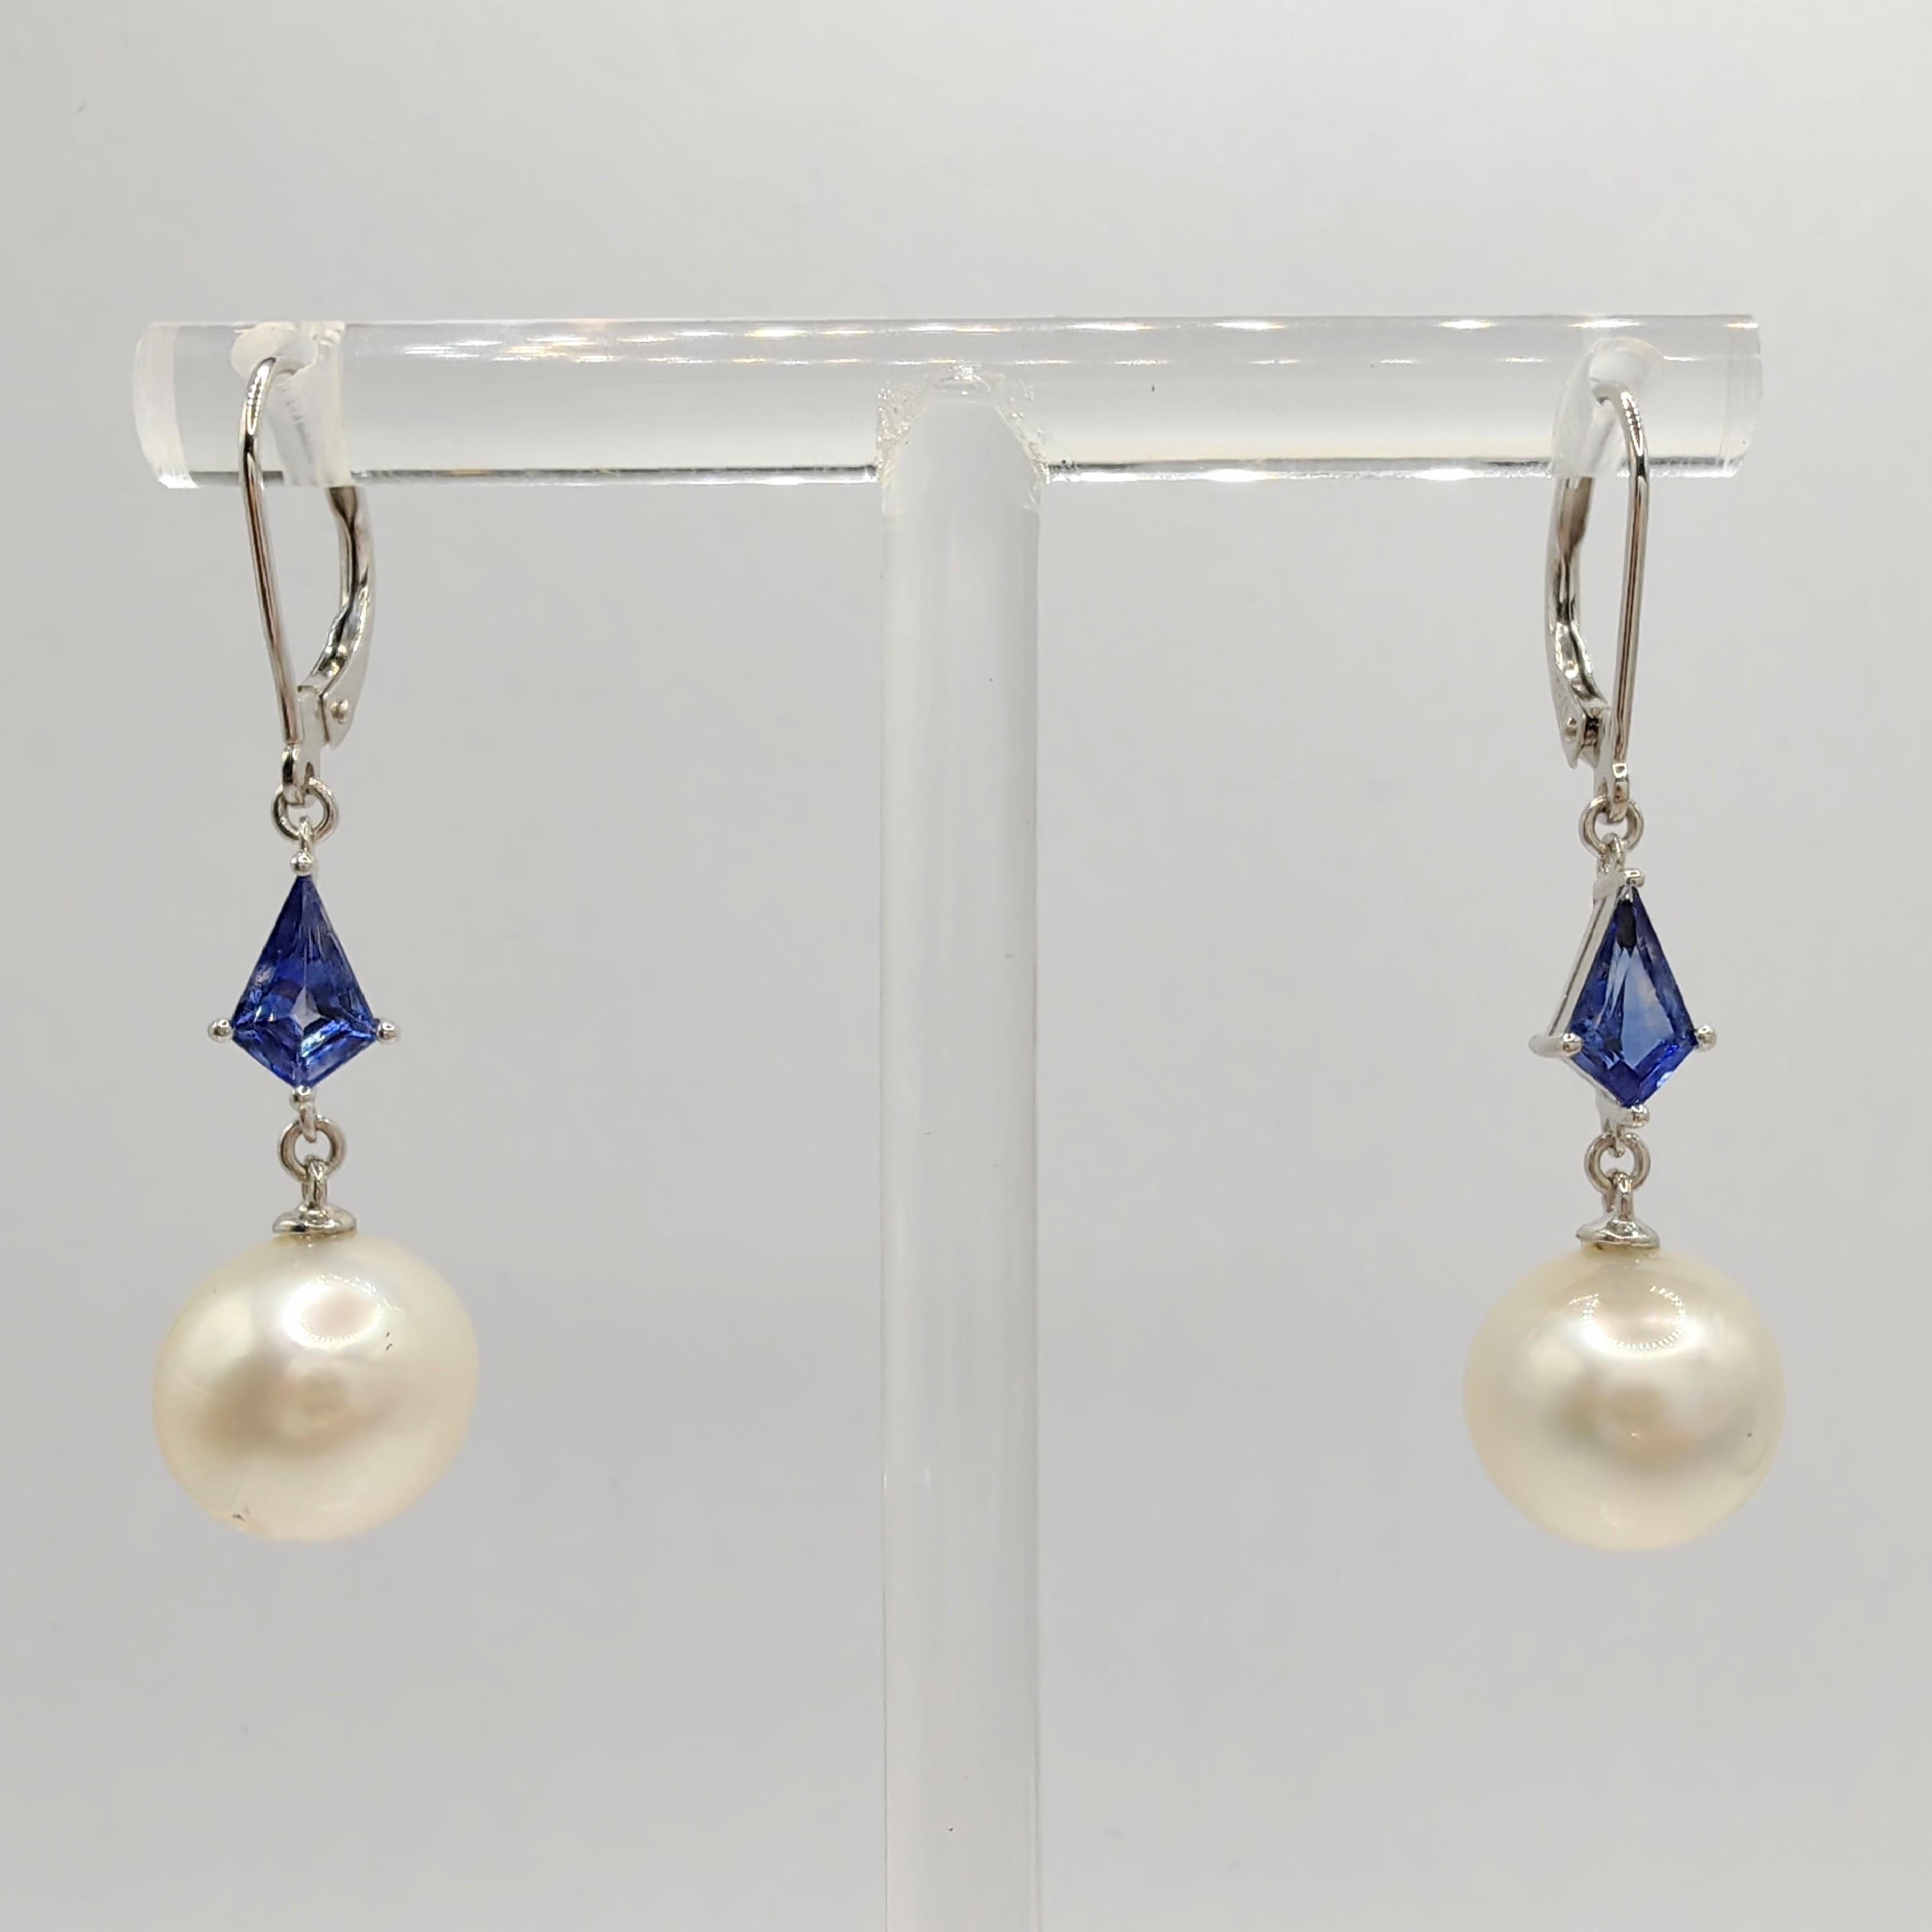 Introducing our exquisite 10mm Natural Pearl & Kite Cut Blue Sapphire 18K White Gold Dangling Earrings, a harmonious blend of nature's finest treasures and impeccable craftsmanship.

At the heart of these earrings are two lustrous Natural White